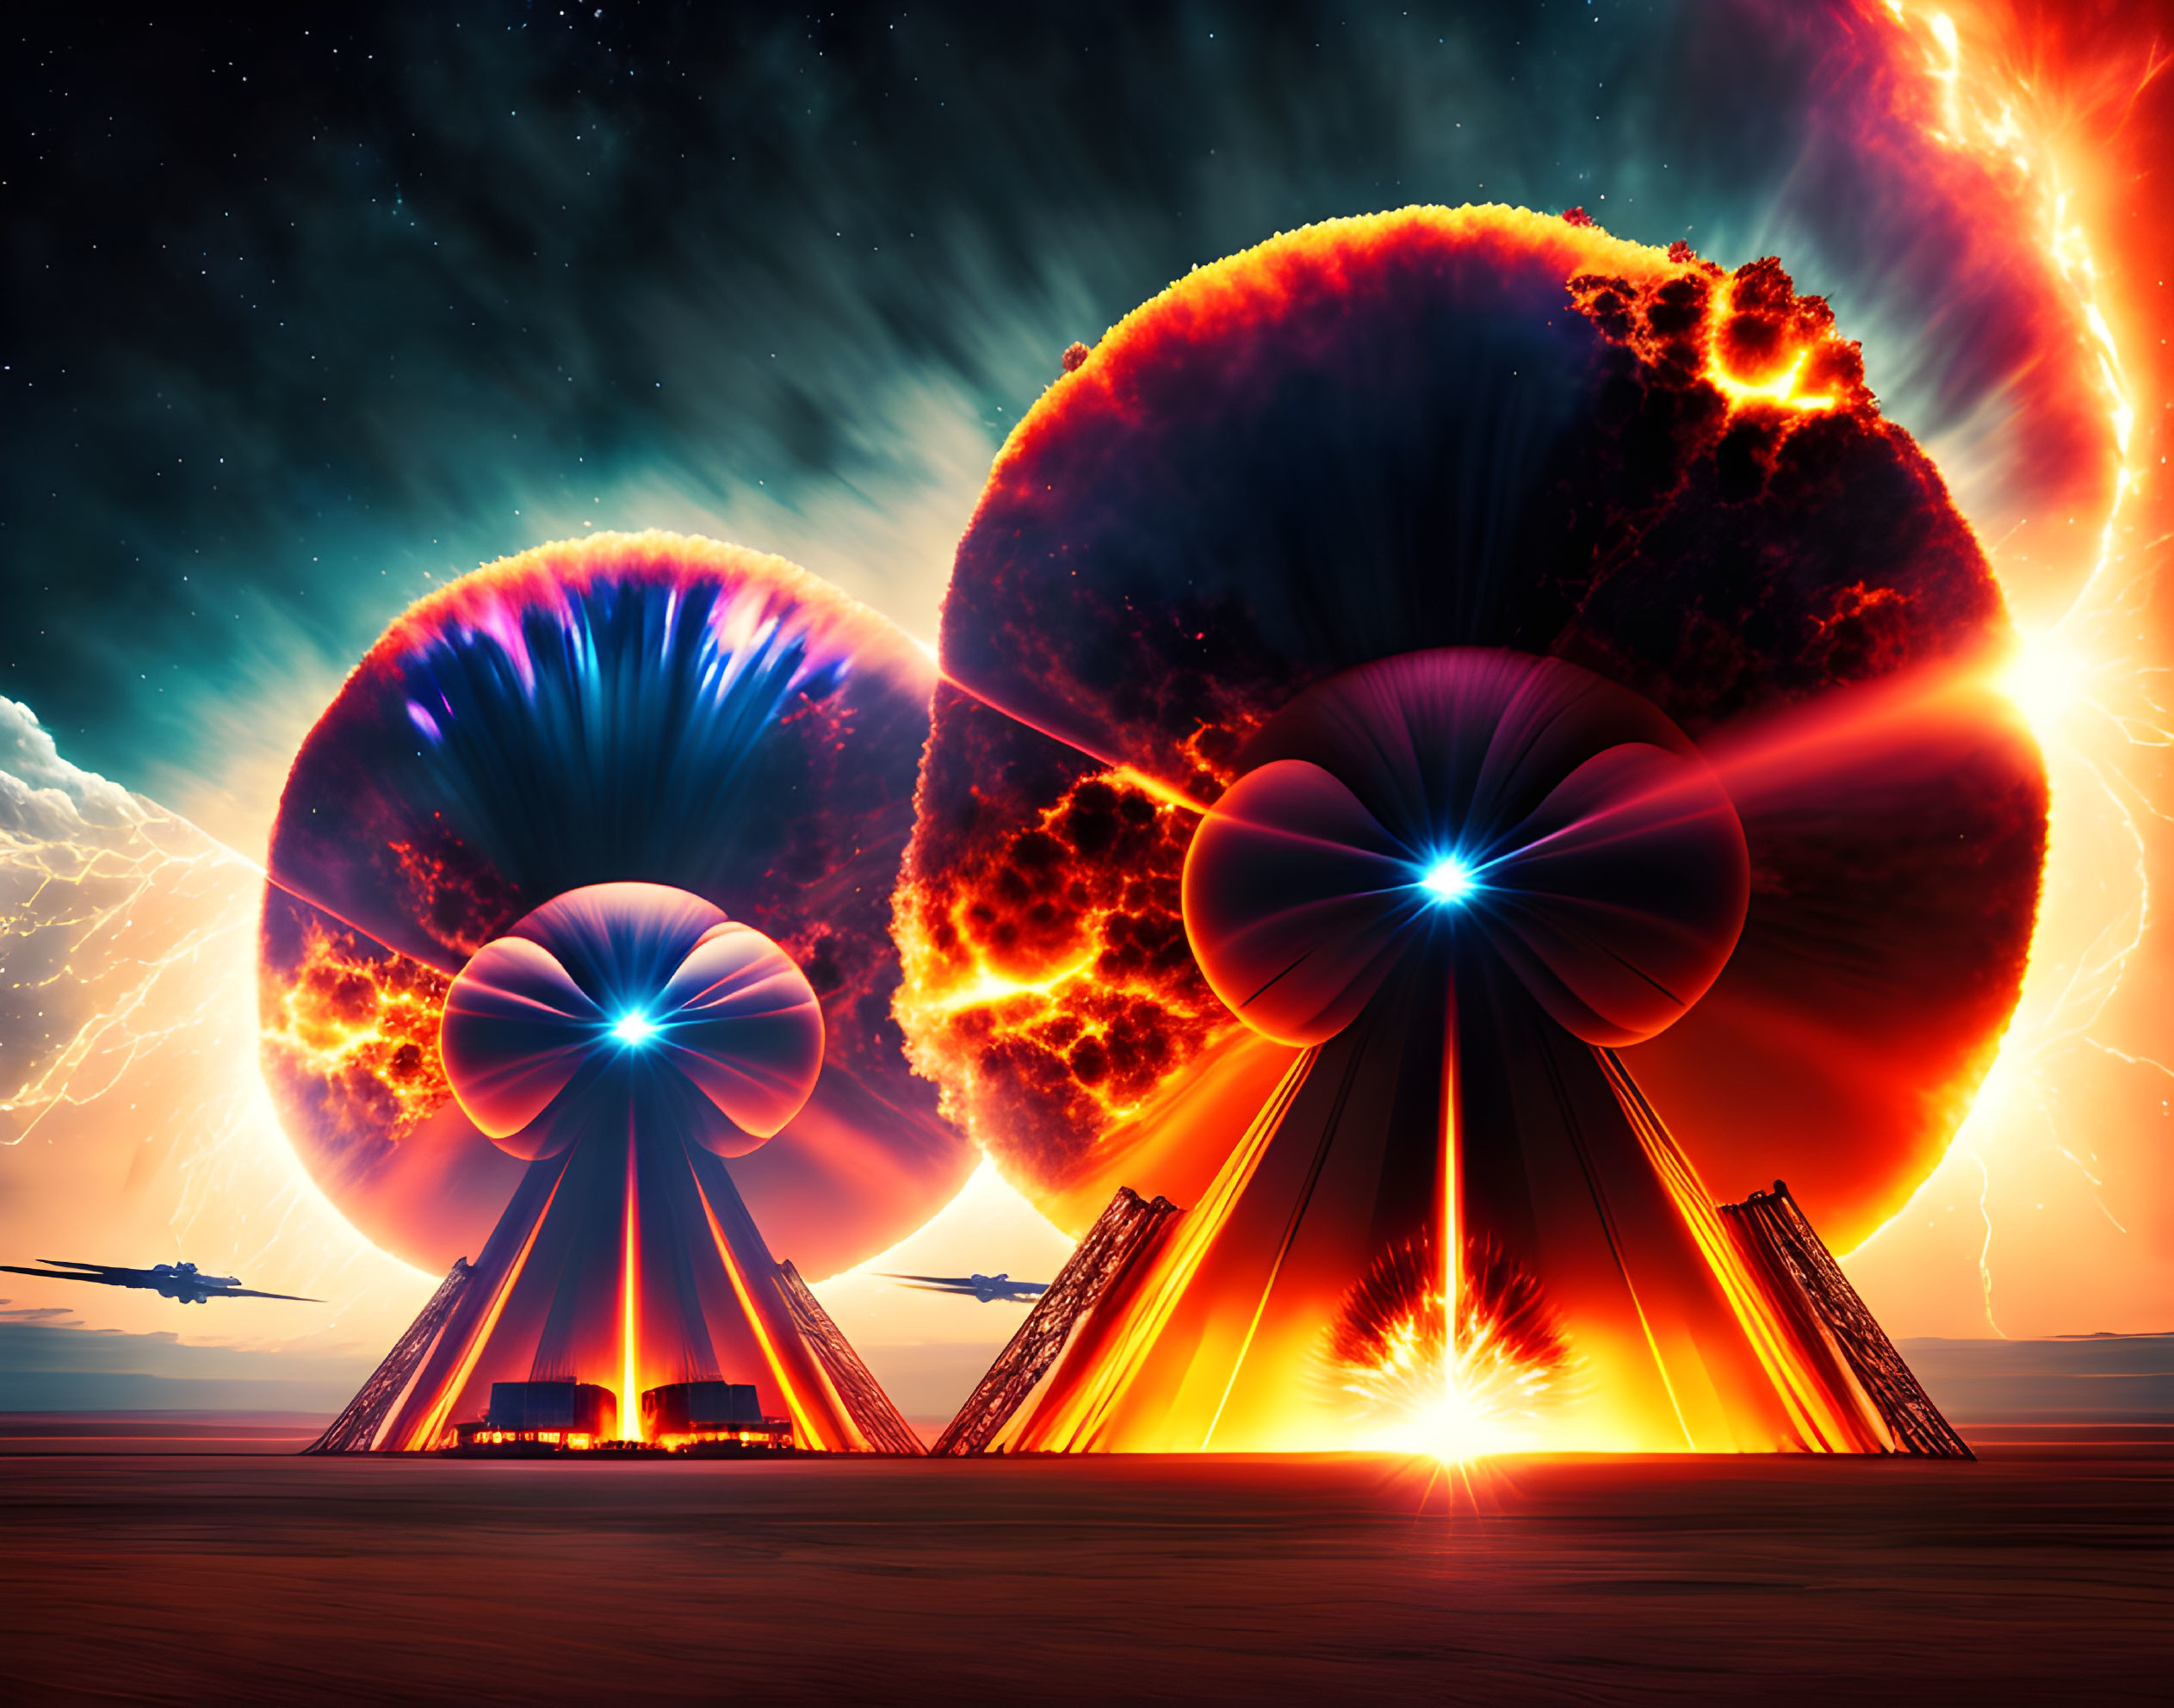 Sci-fi illustration: Colossal mushroom clouds with radiant cores and lightning strikes